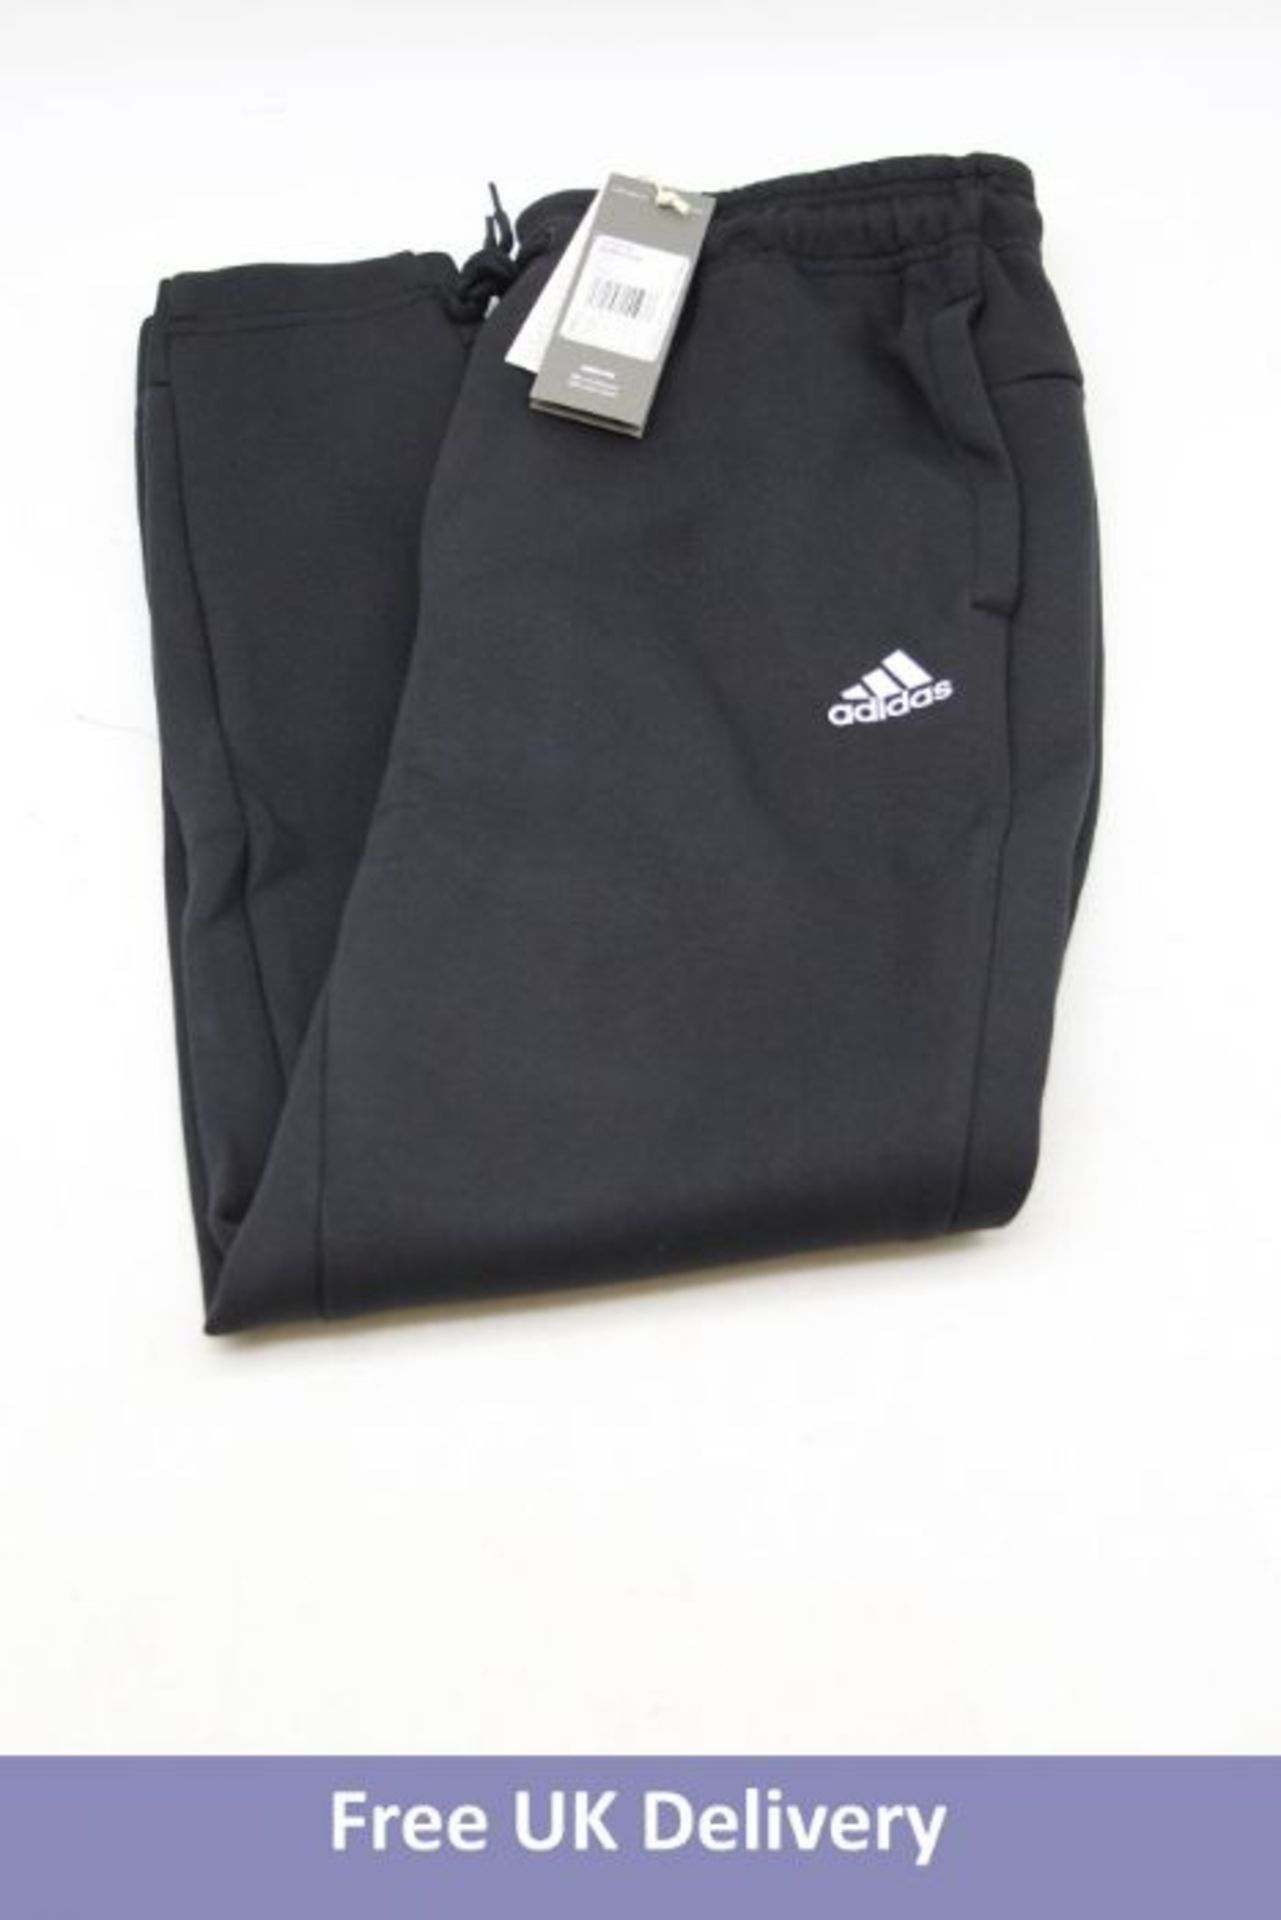 Six Adidas Women's Must Haves Joggers, Black, Large - Image 2 of 2